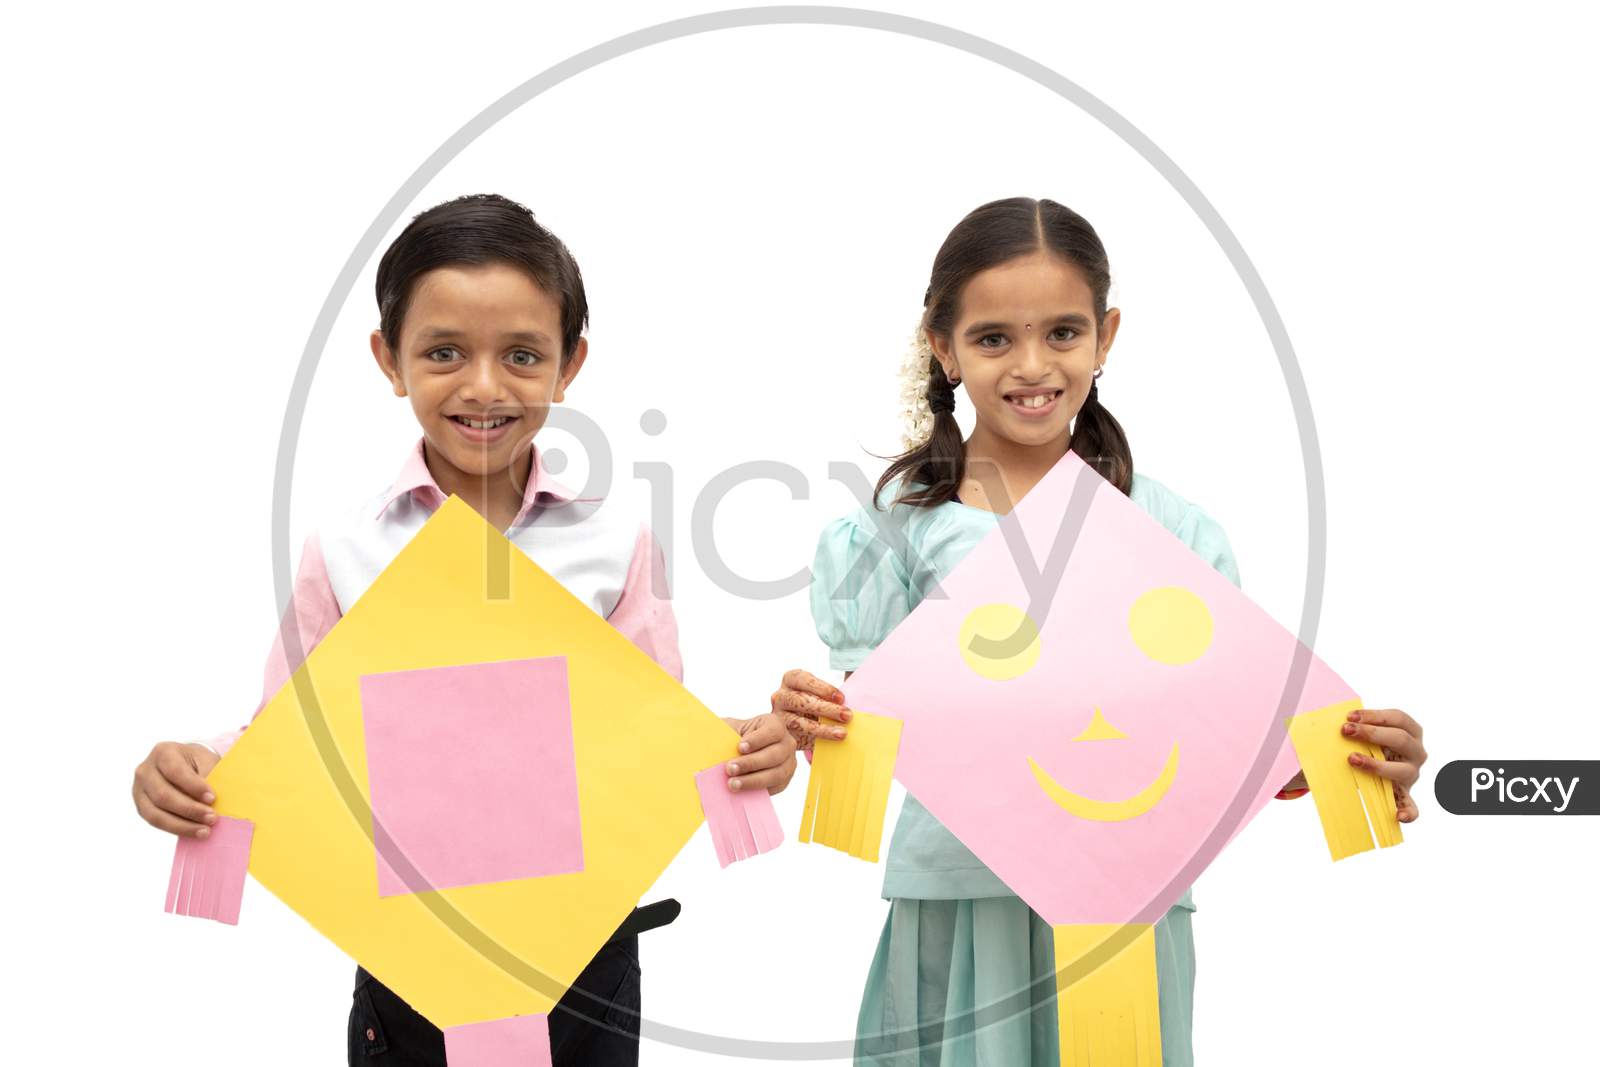 A Boy and Girl Holding Kits in Hands - A Indian Festival Sankranthi